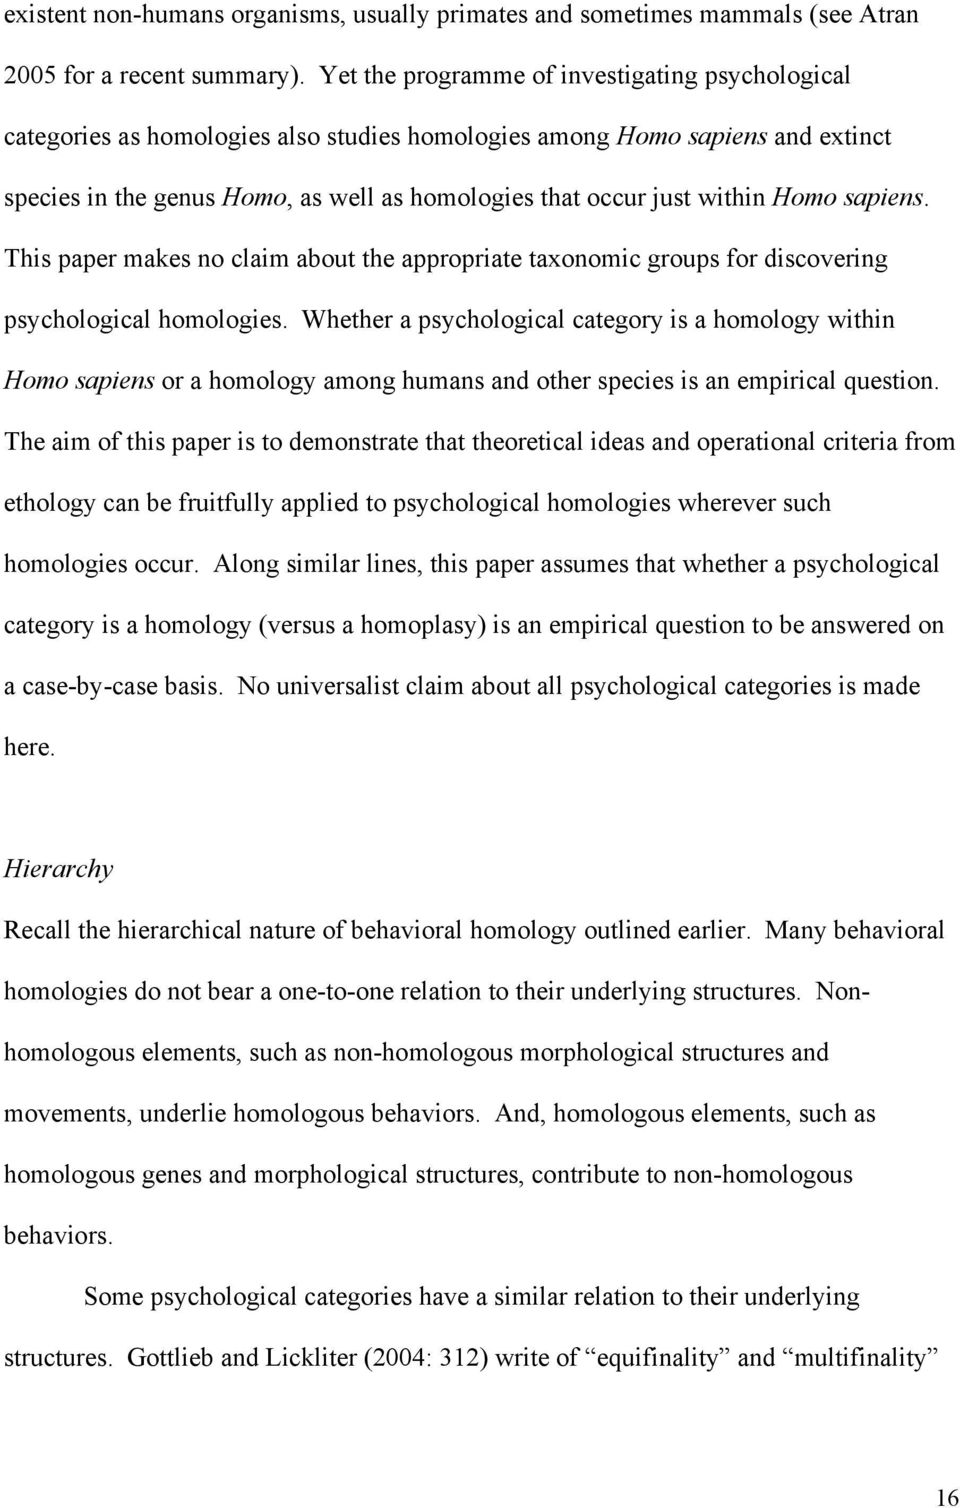 within Homo sapiens. This paper makes no claim about the appropriate taxonomic groups for discovering psychological homologies.